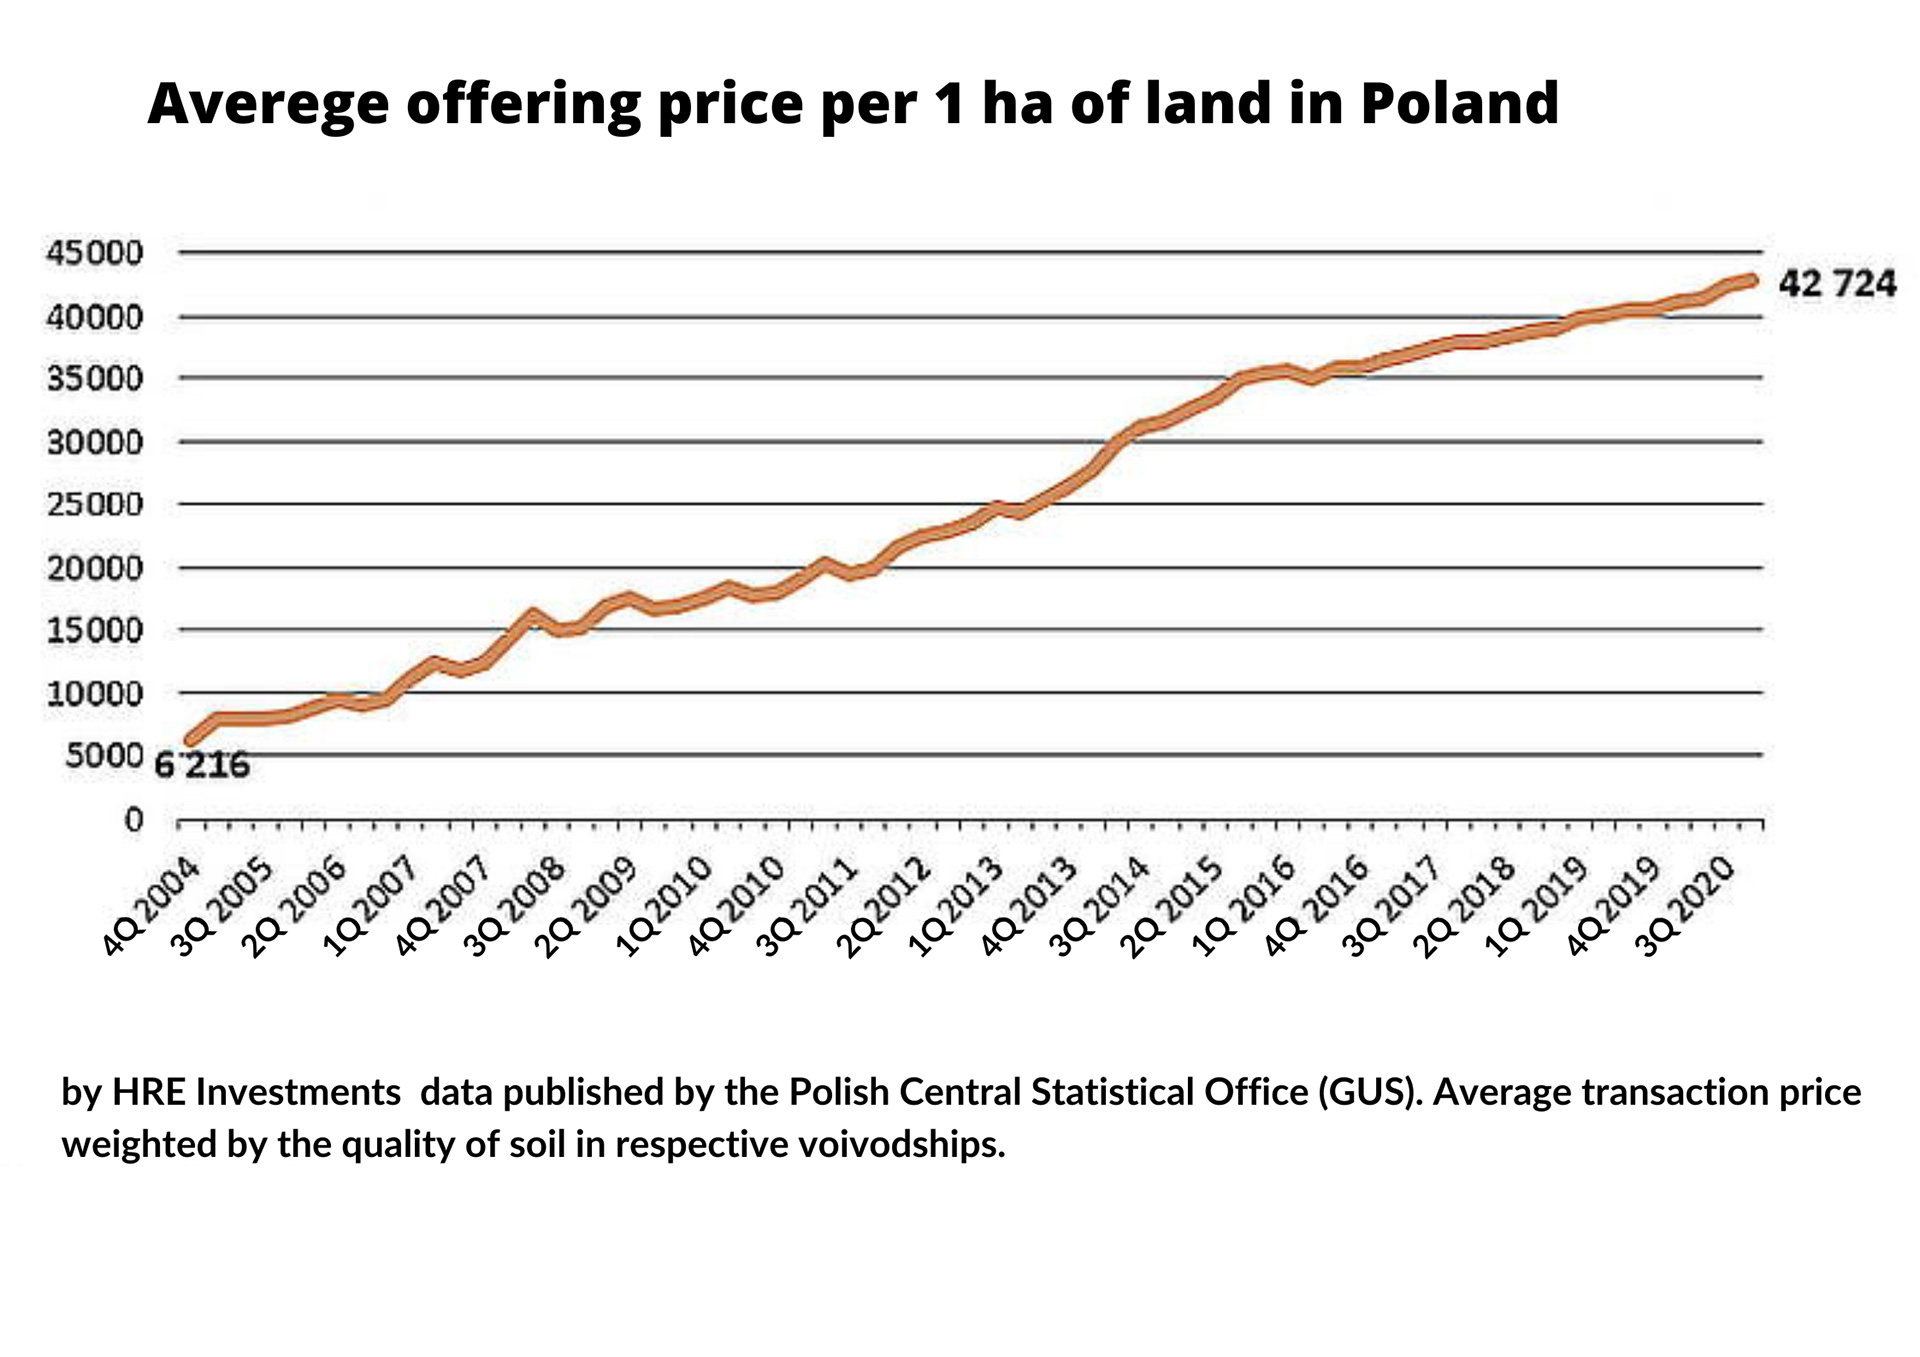 by-HRE-Investments-data-published-by-the-Polish-Central-Statistical-Office-(GUS).-Average-transaction-price-weighted-by-the-quality-of-soil-in-respective-voivodships.jpg